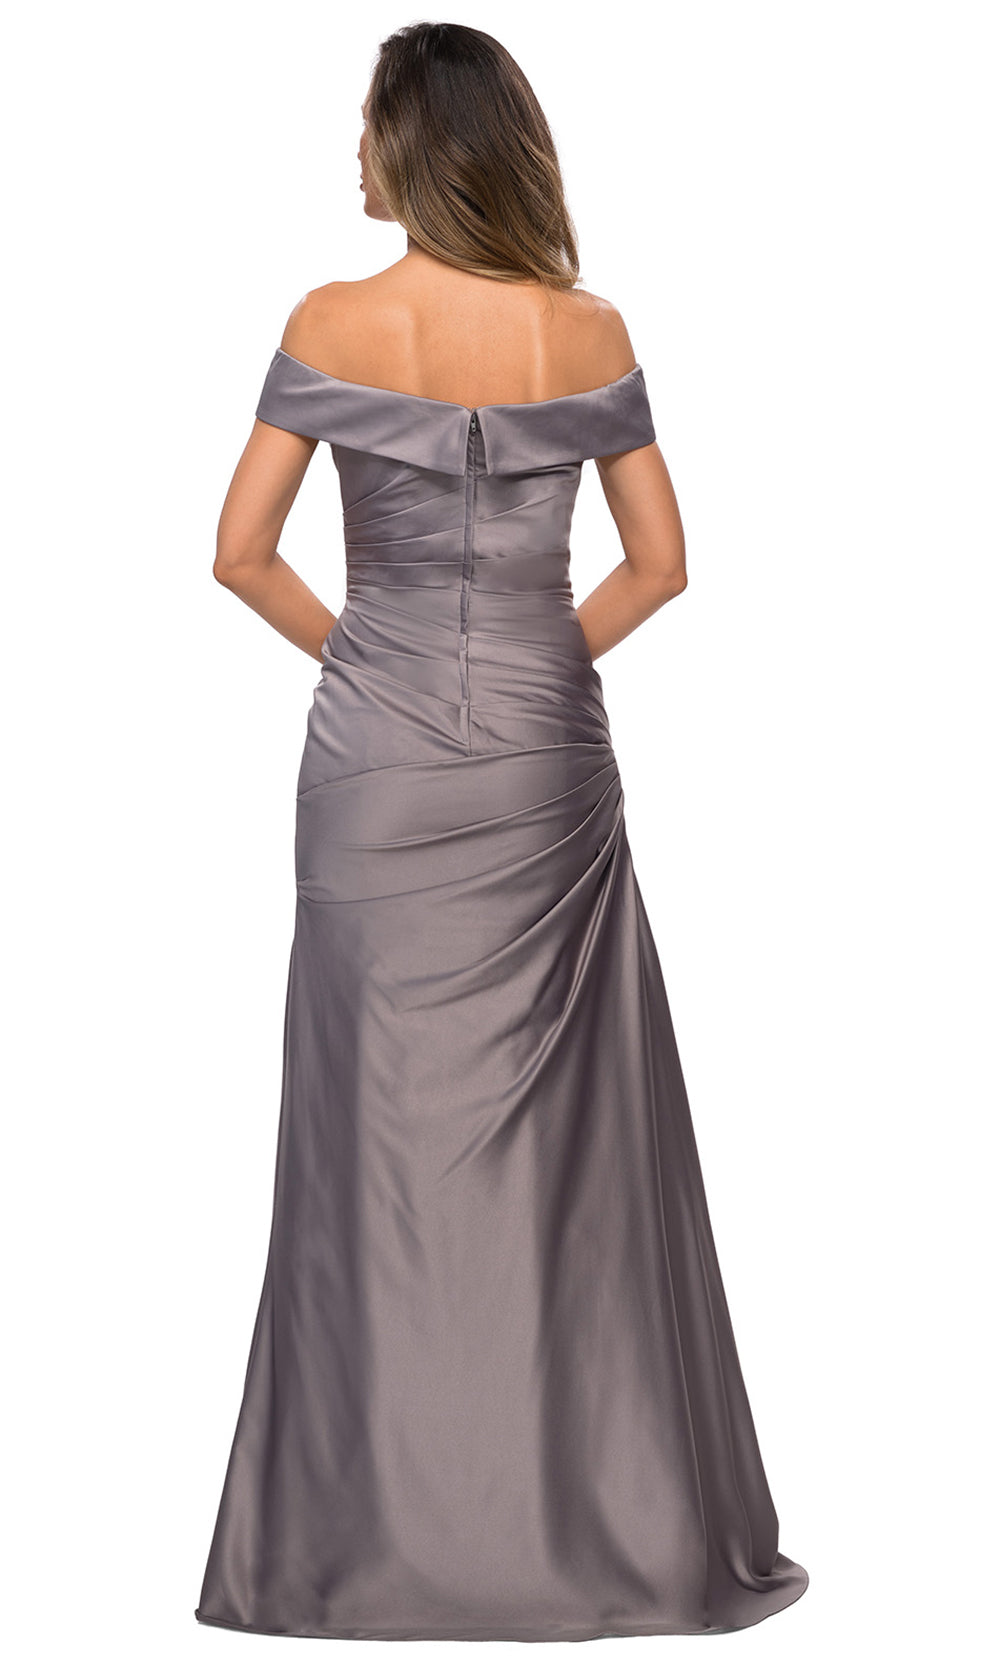 La Femme - 28103 Off-Shoulder Ruched Fitted Bodice Satin Evening Dress In Silver & Gray